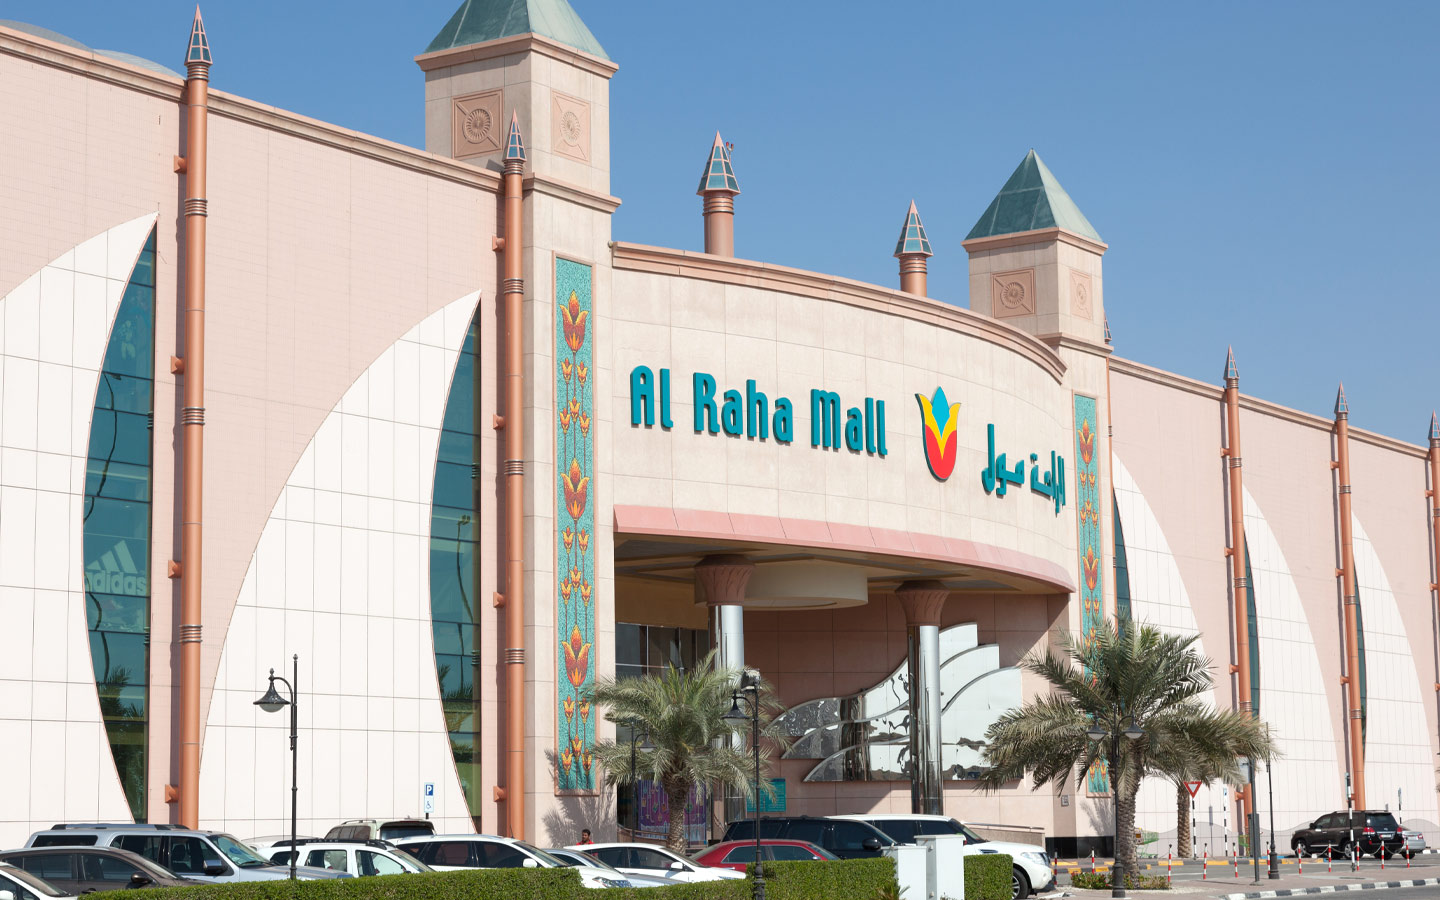 Al Raha Mall is easily accessible to residents of Al Reef